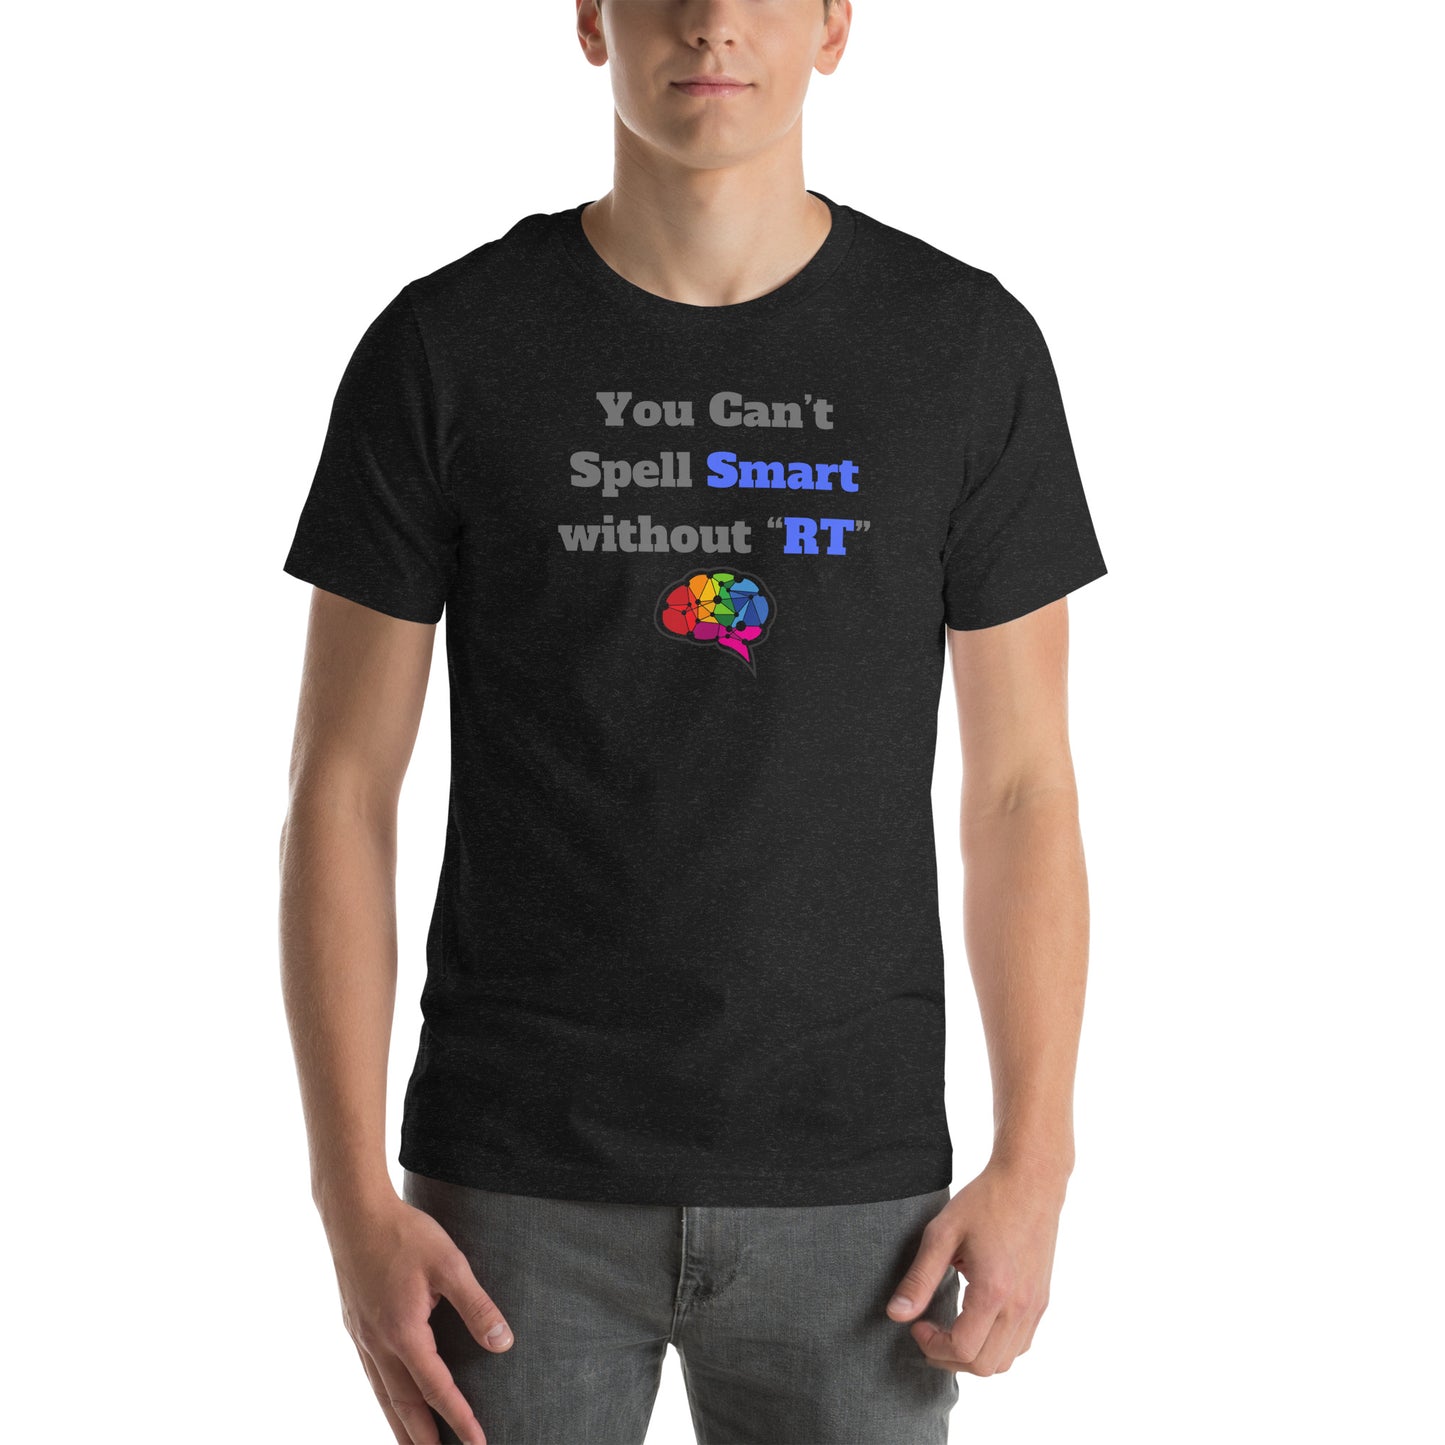 You Can't Spell Smart - Blue Unisex t-shirt